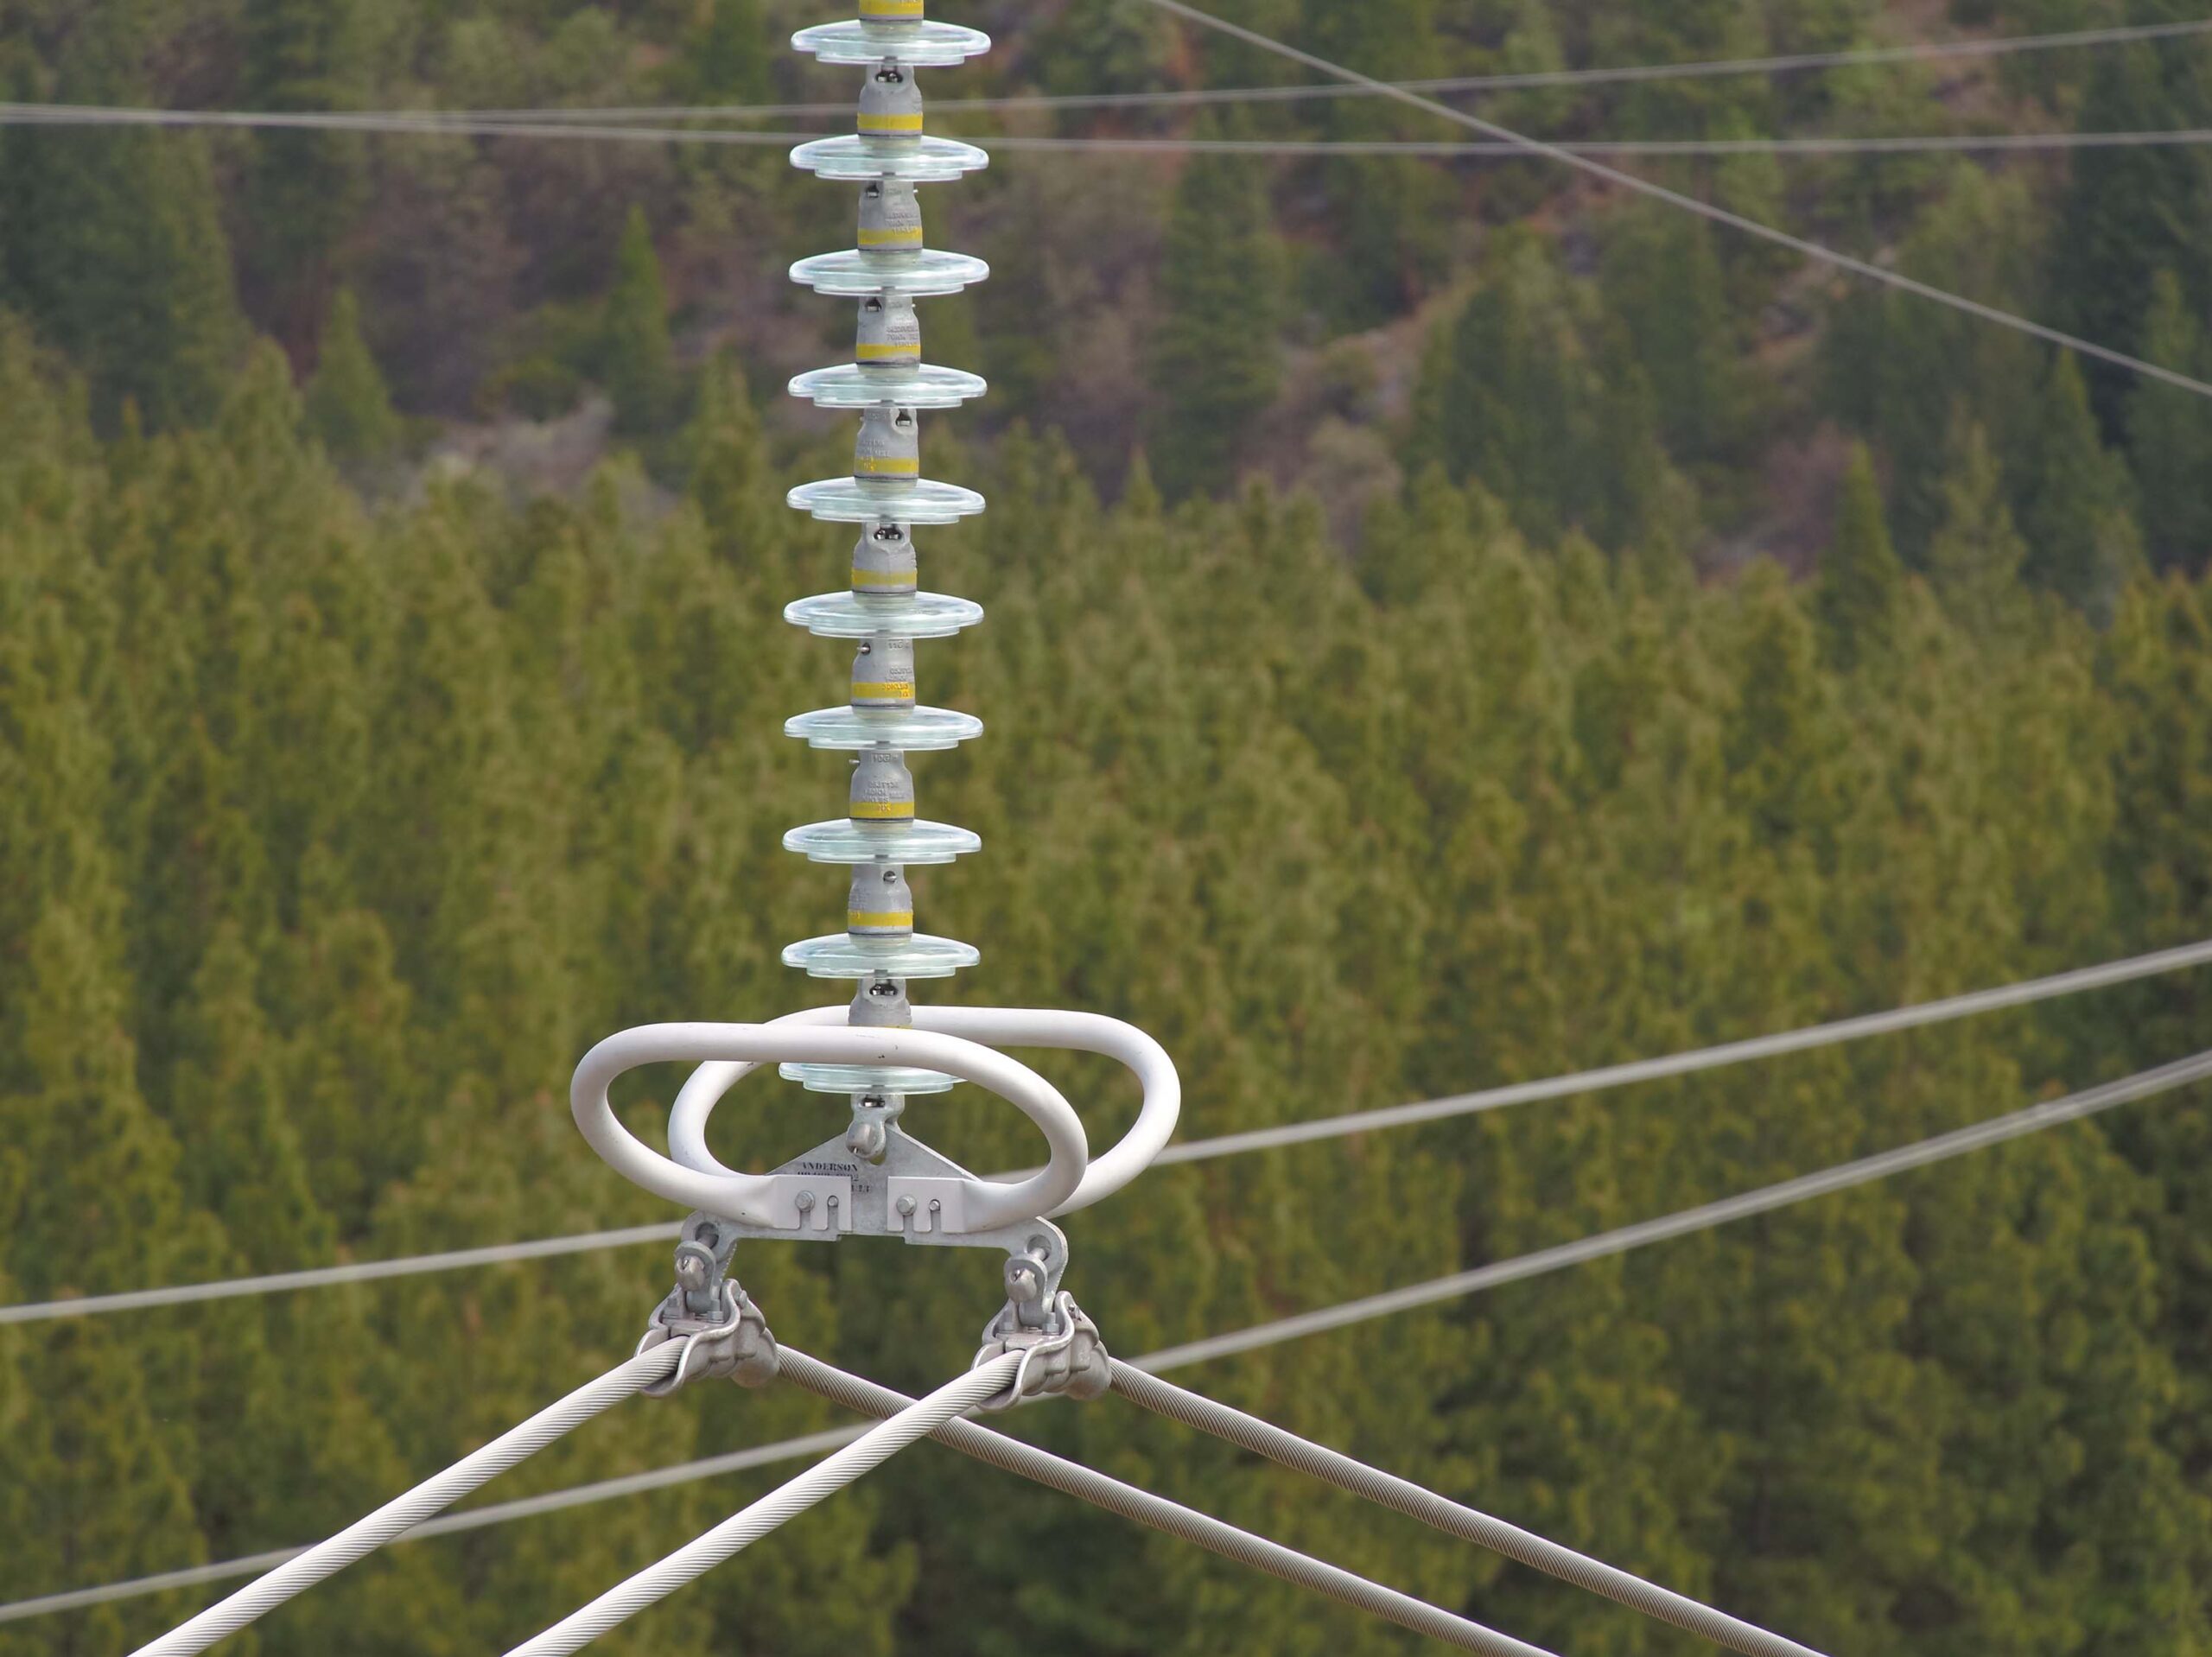 An up-close view of a power transmission line component.